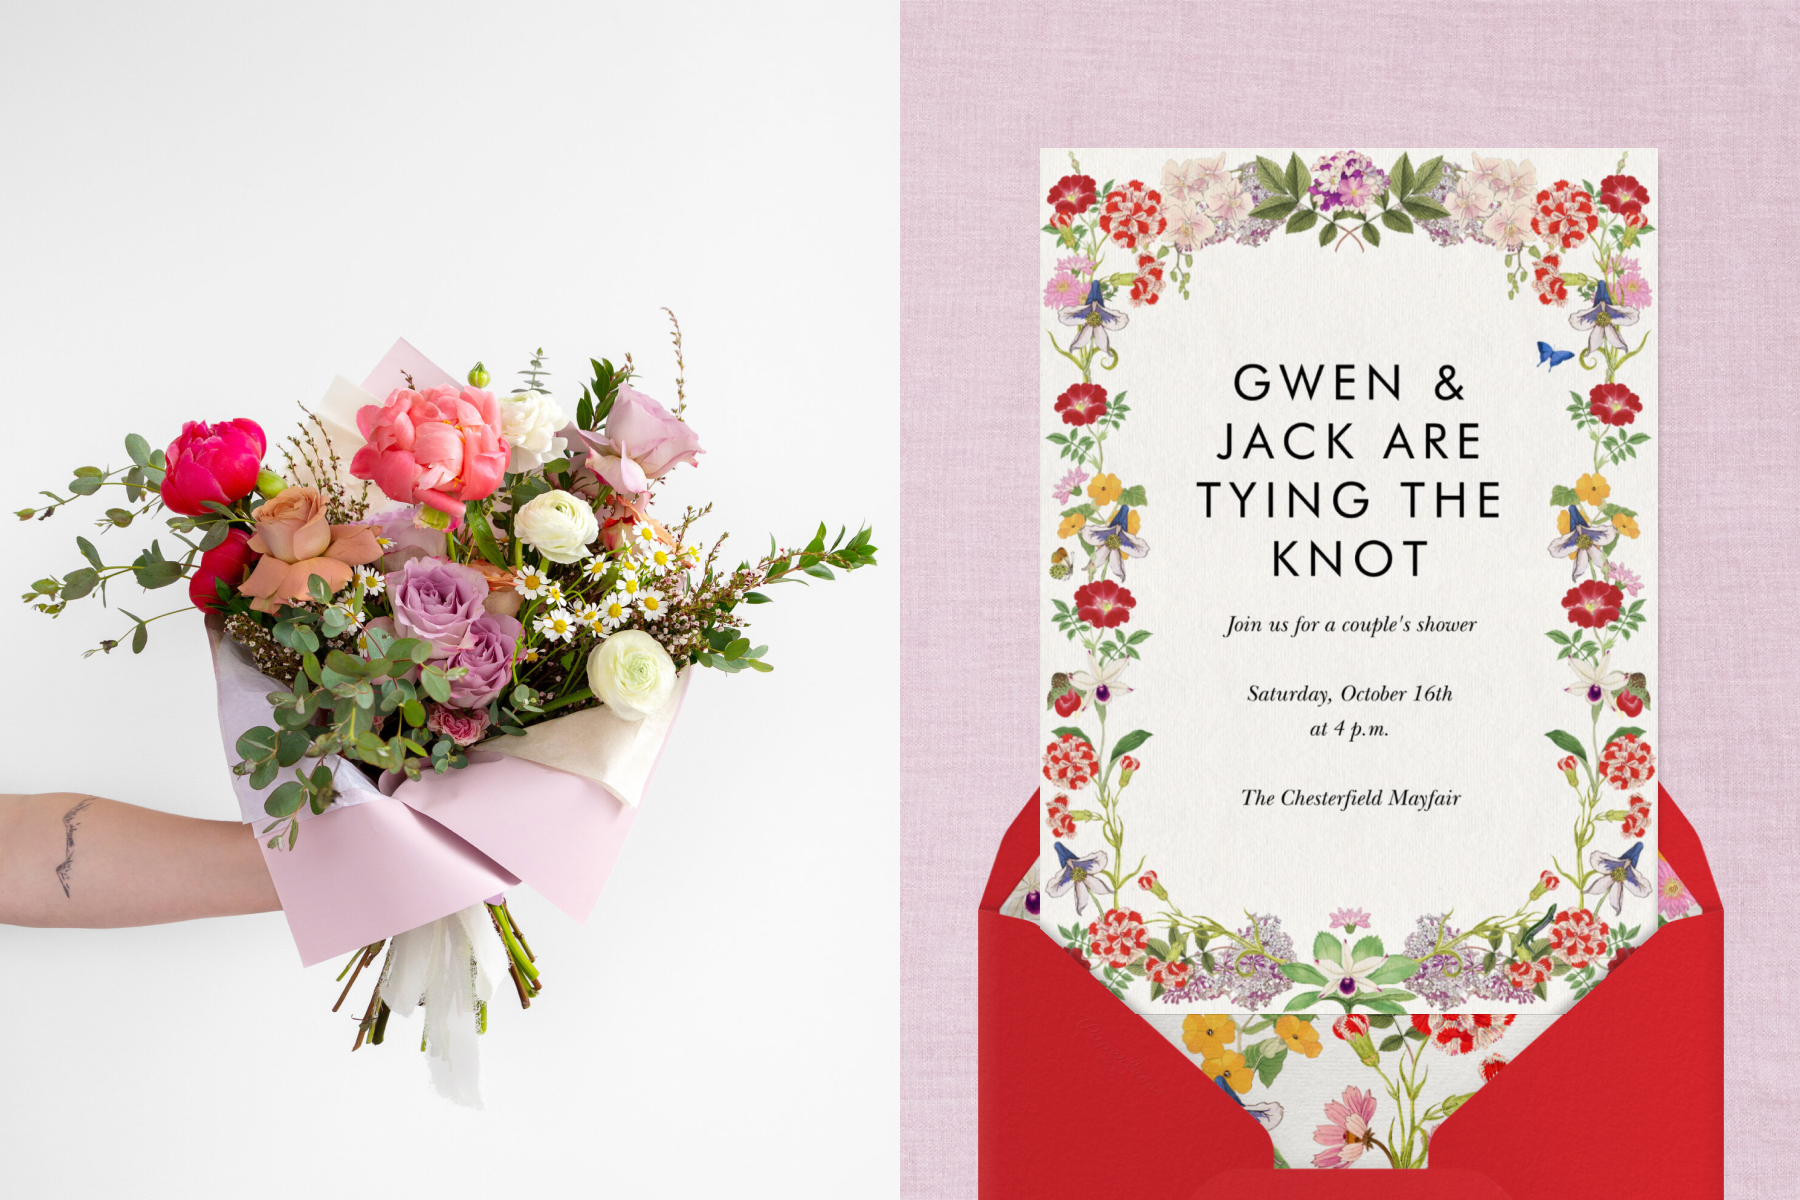 Left: An arm reaches out from the left holding a wrapped bouquet of various colored roses, daisies, and sprigs of green. Right: A couple’s shower invitation with a border of delicate, colorful flowers and a red envelope.